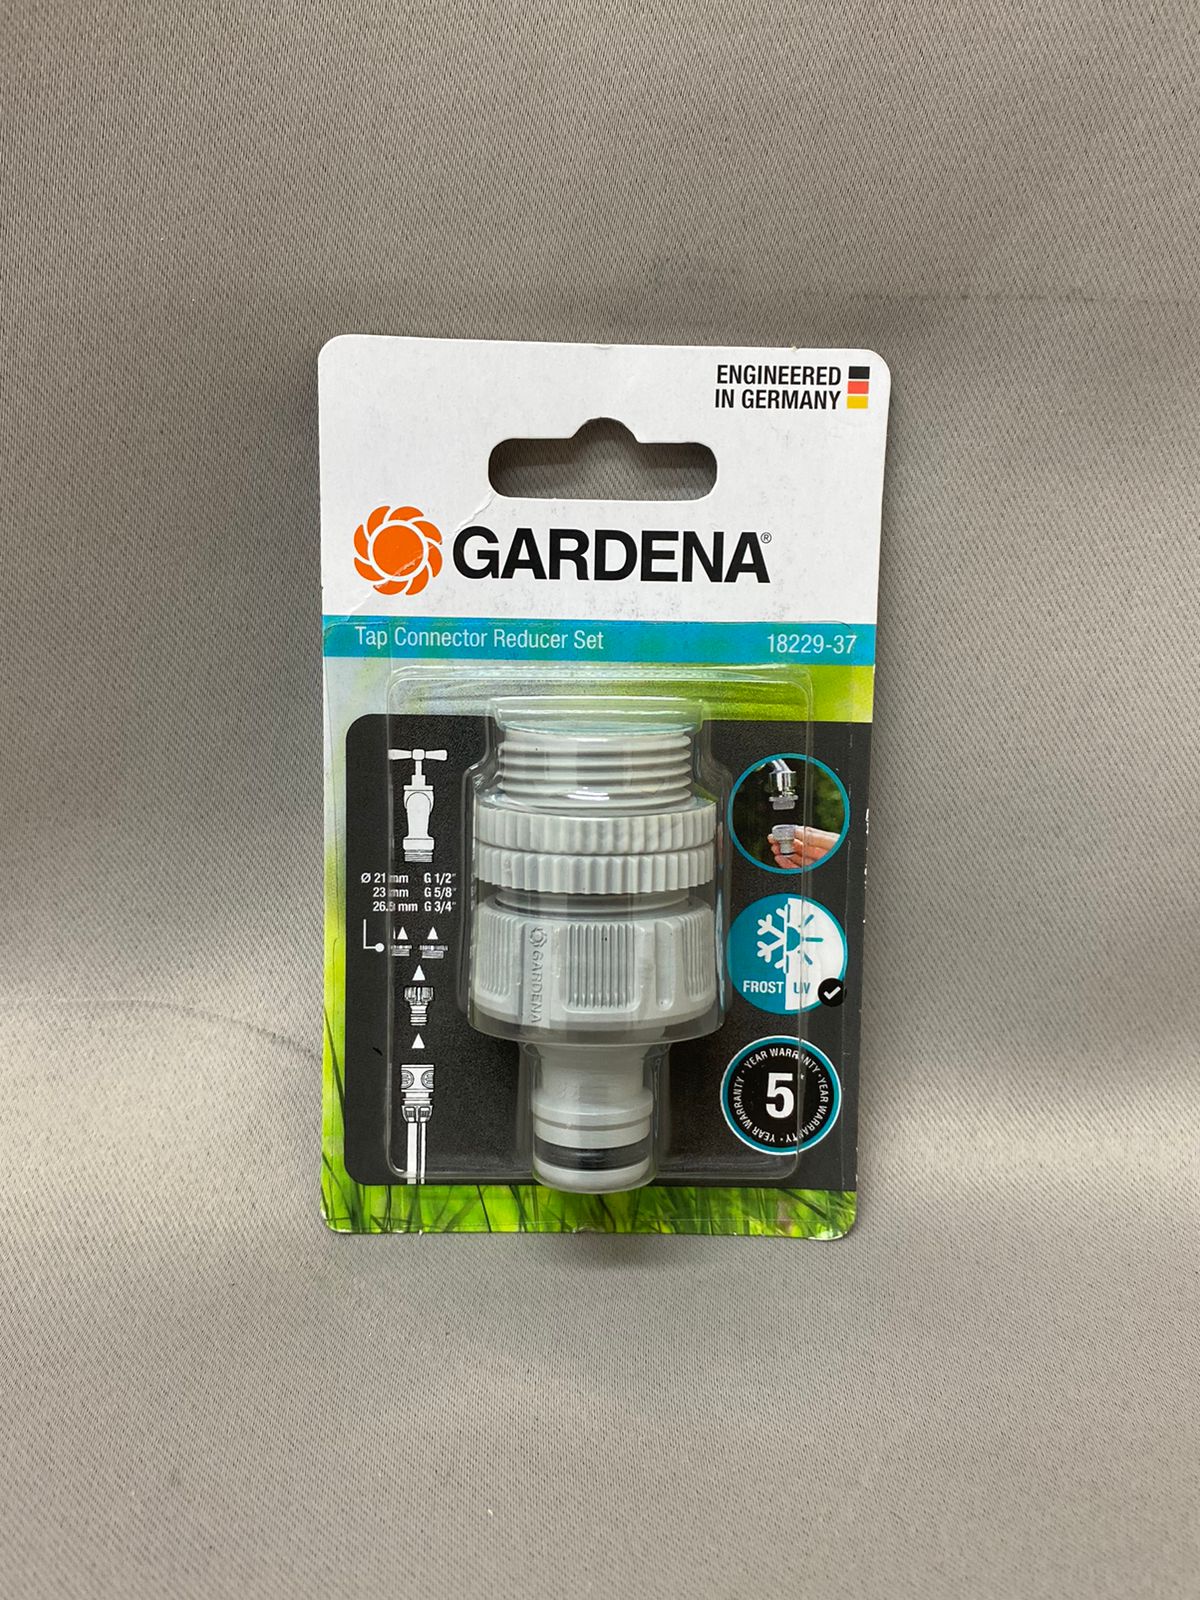 A Gardena brand tap connector reducer in retail packaging against a plain background.